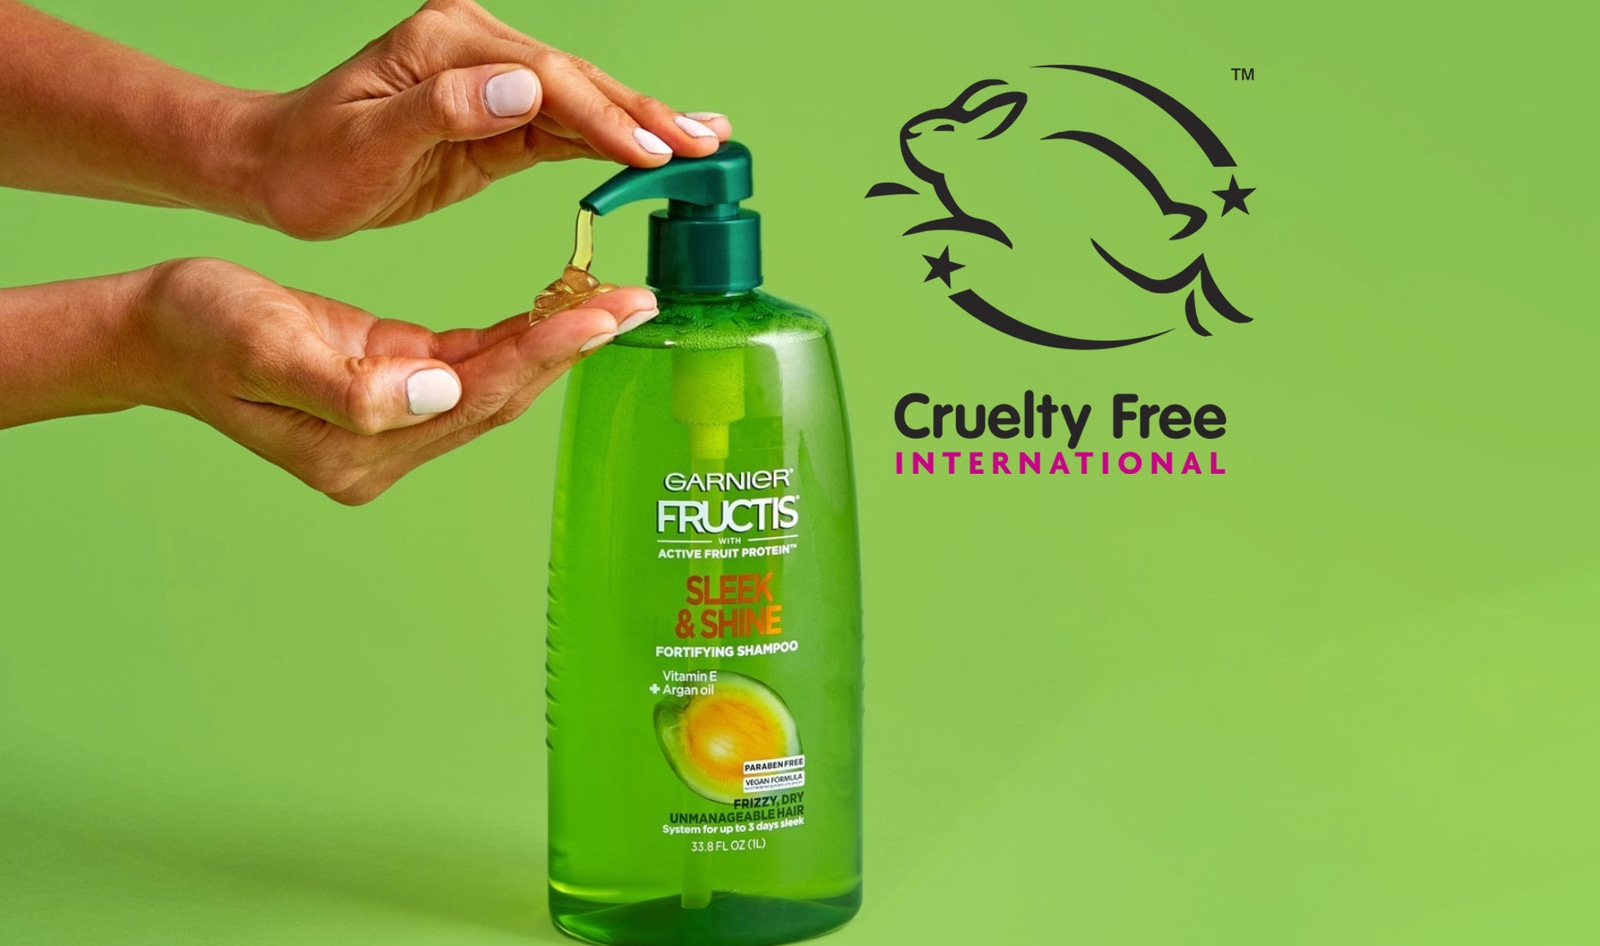 Garnier Products Are Now Officially Cruelty-Free | VegNews